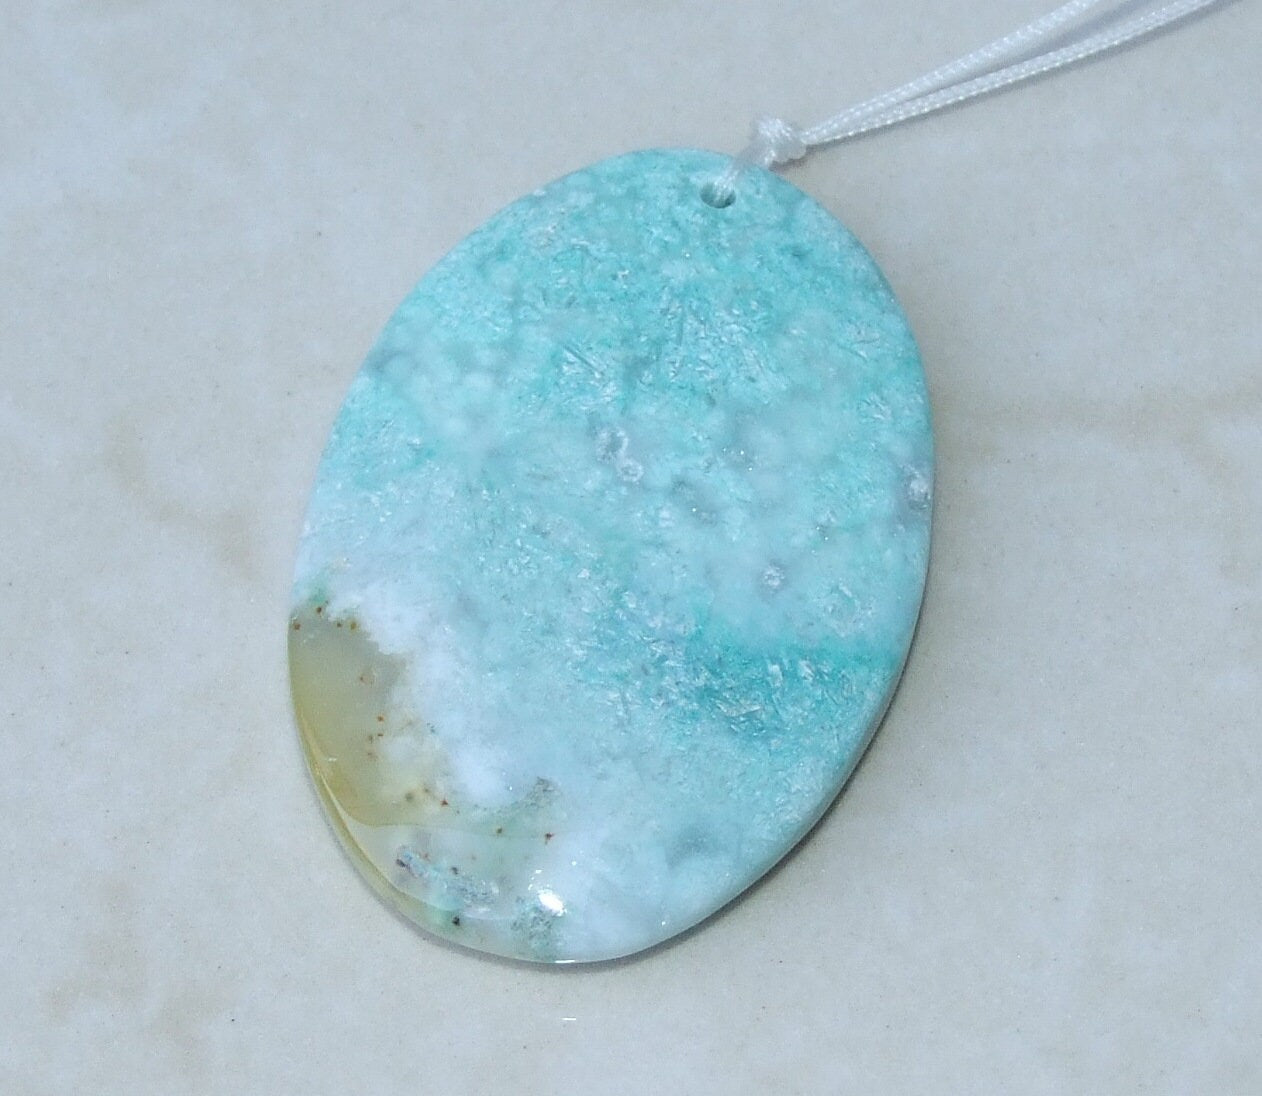 Fossil Coral Agate Pendant, Natural Stone Pendant, Druzy Pendant, Gemstone Pendant, Jewelry Stone, Necklace Pendant, 34mm x 51mm - 9514